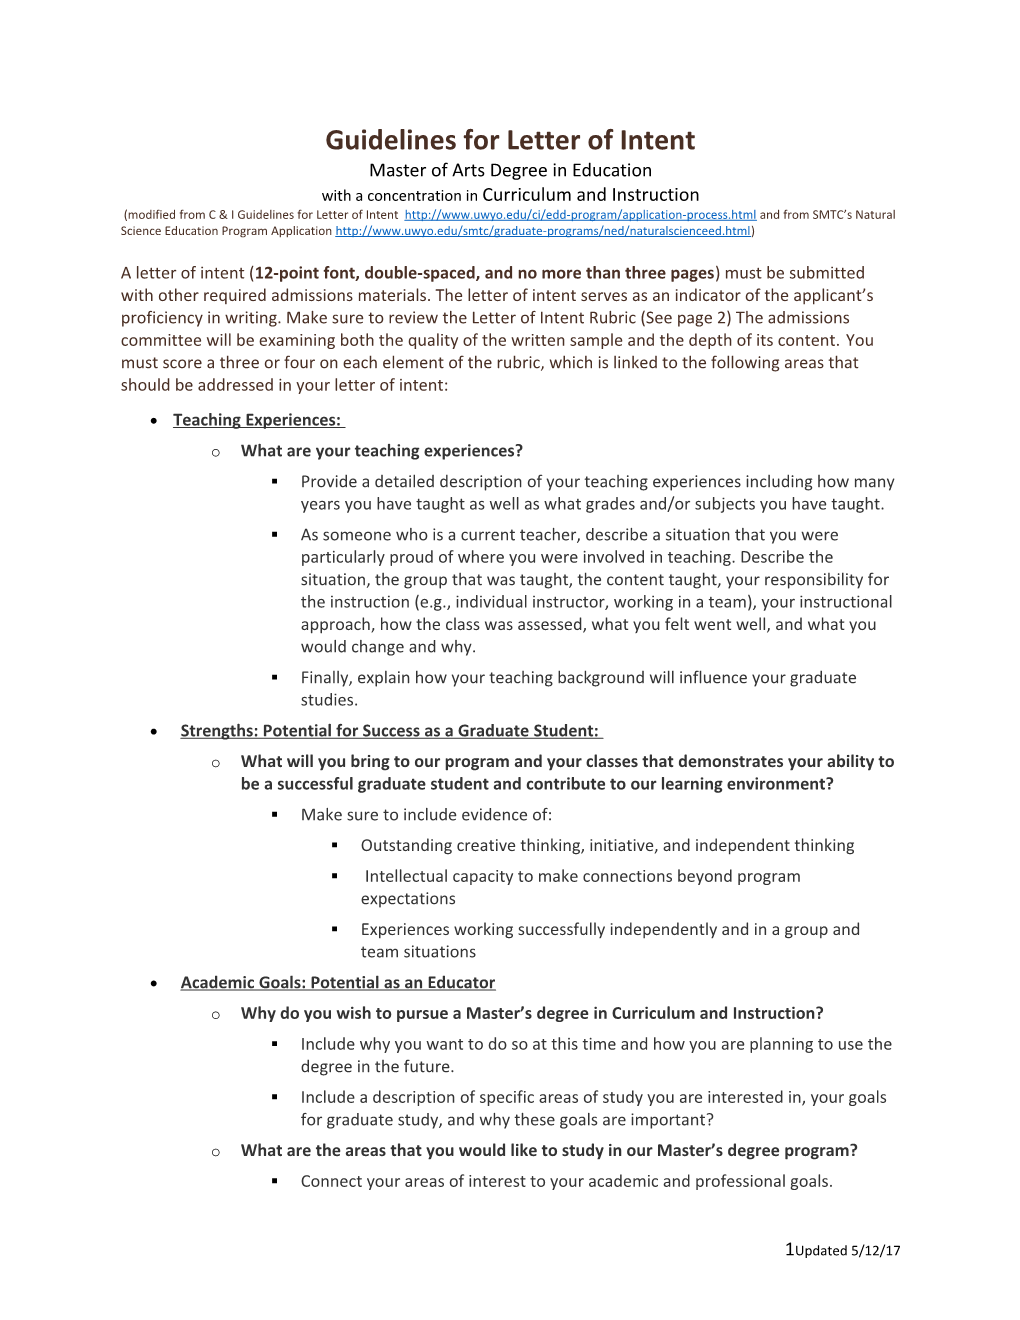 Guidelines for Letter of Intent